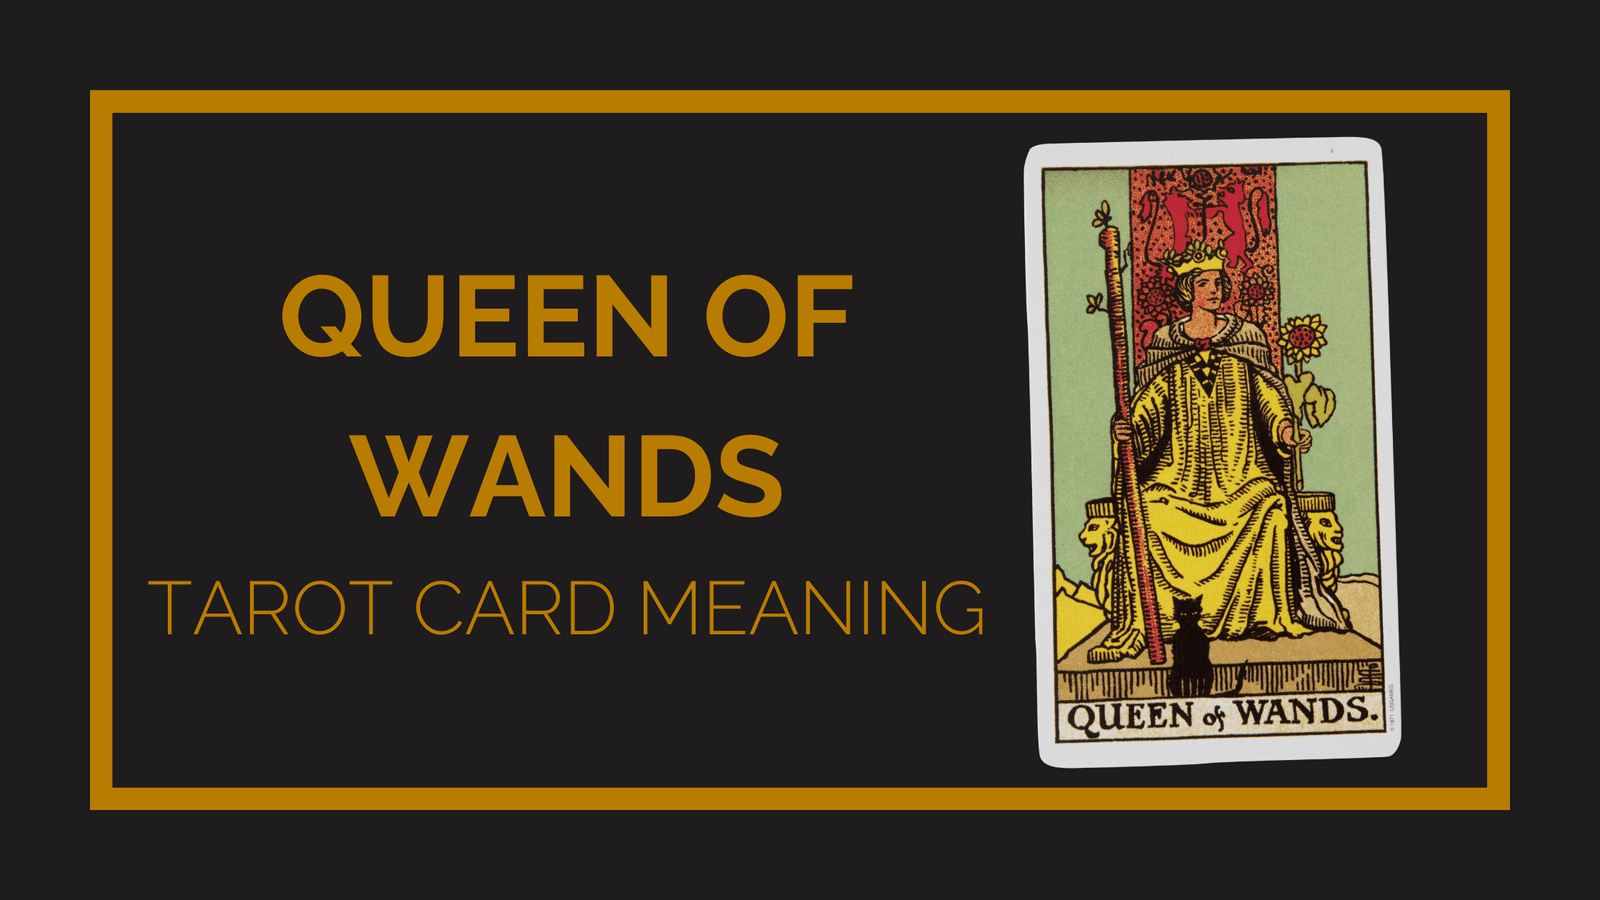 Queen of wands tarot card meaning | tarot with gord